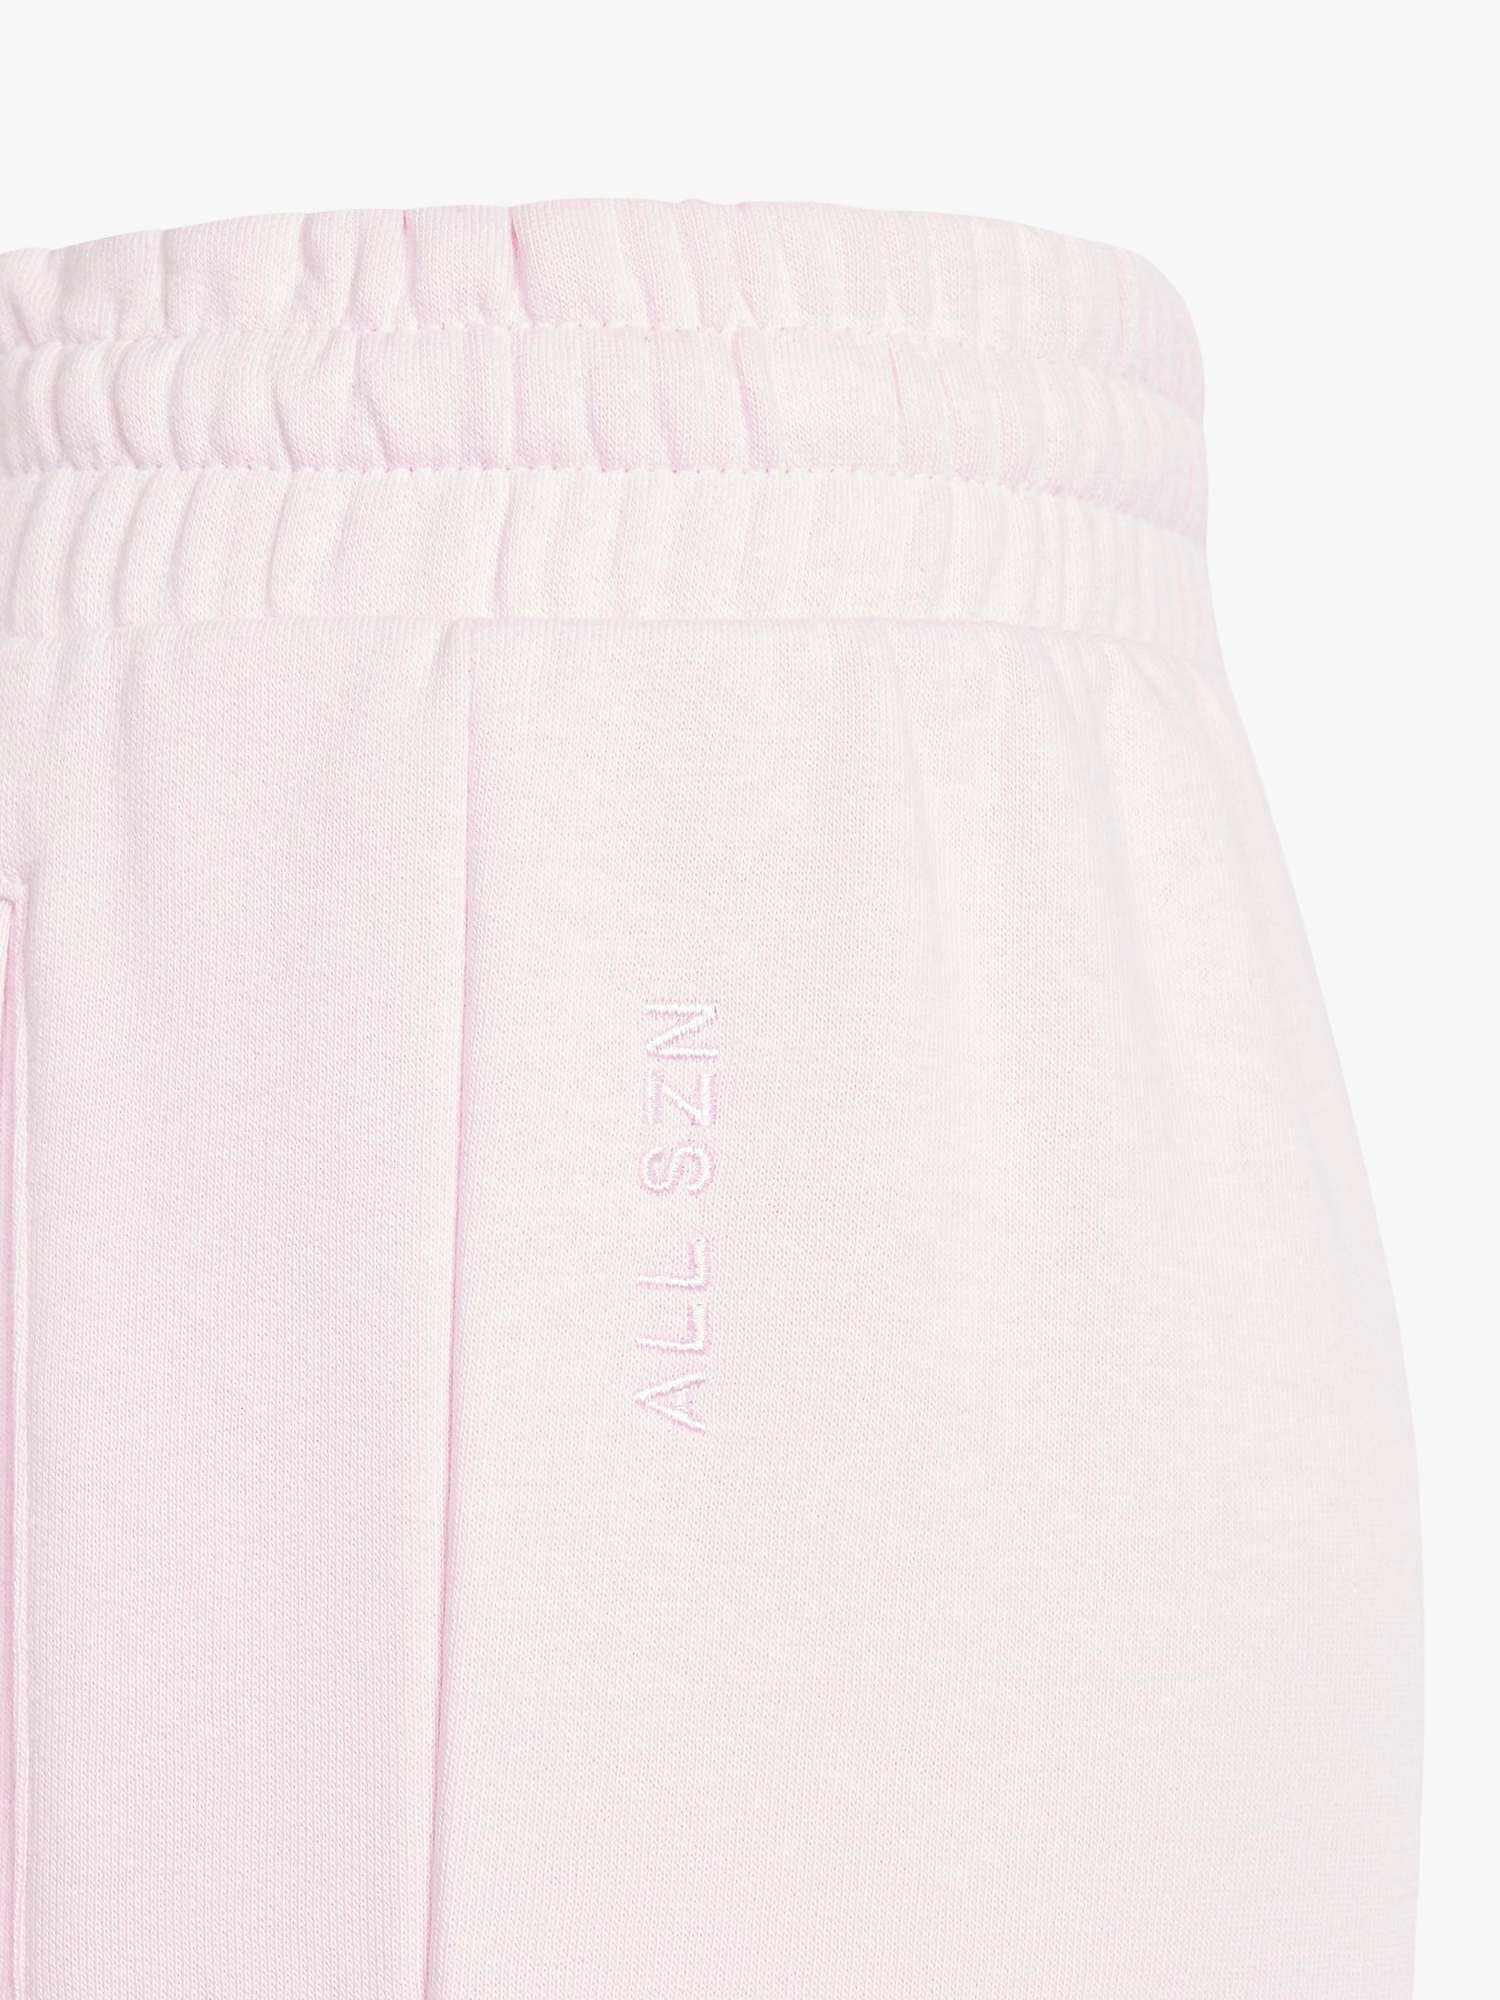 Buy adidas Kids' All SZN Joggers, Pink Online at johnlewis.com